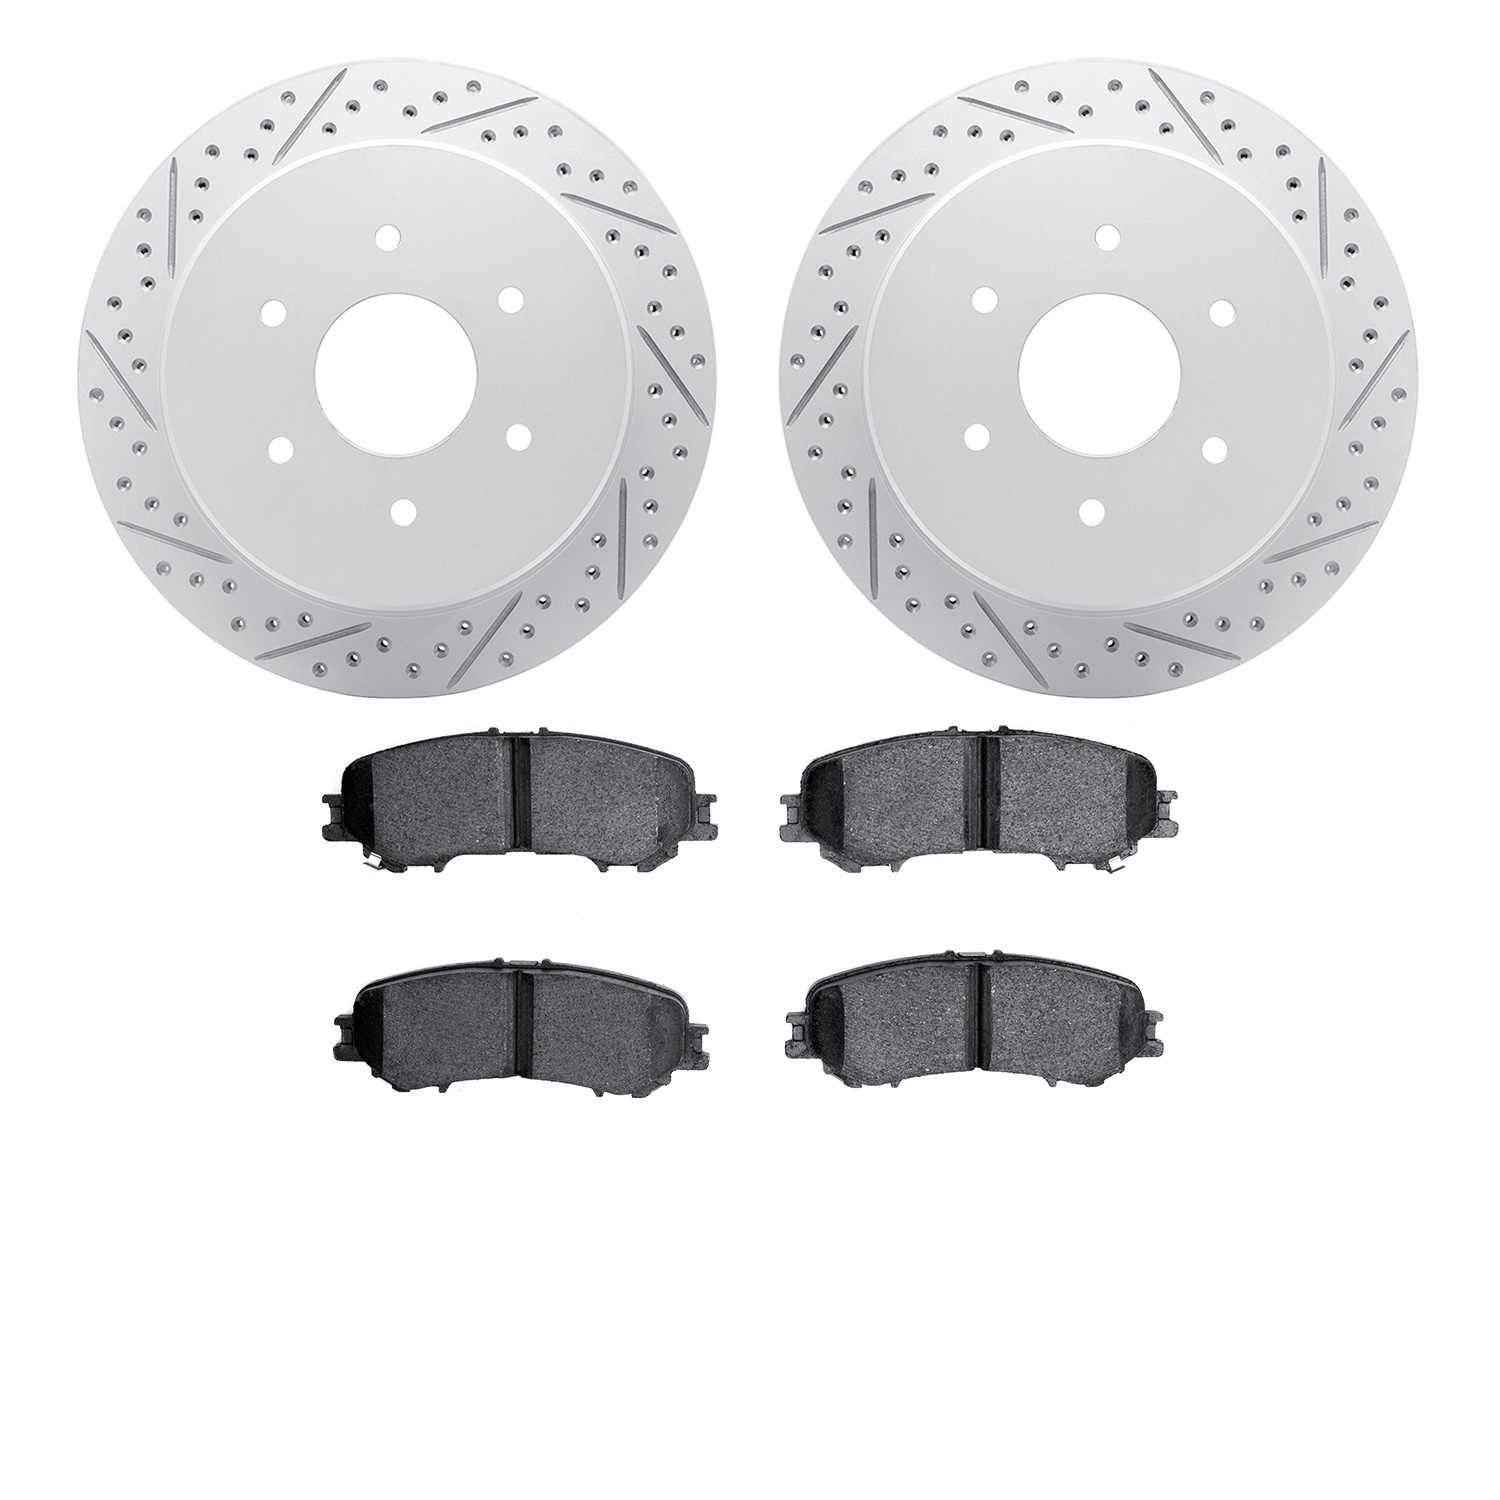 2502-67131 Geoperformance Drilled/Slotted Rotors w/5000 Advanced Brake Pads Kit, Fits Select Infiniti/Nissan, Position: Rear